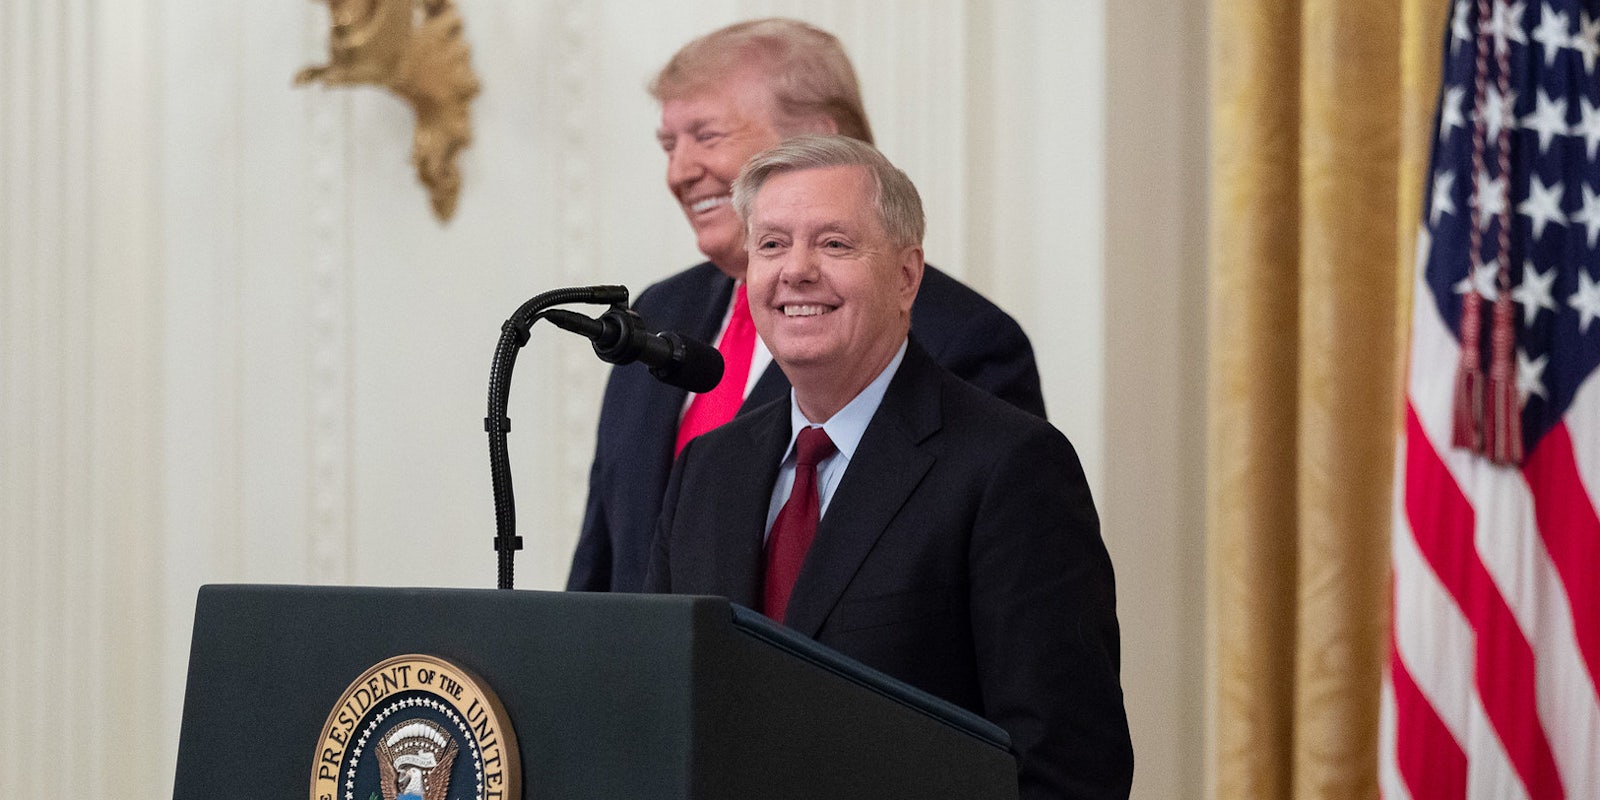 Sen. Lindsey Graham unveiled a bill that would repeal Section 230 of the Communications Decency Act in 3 years unless Congress acts on it.